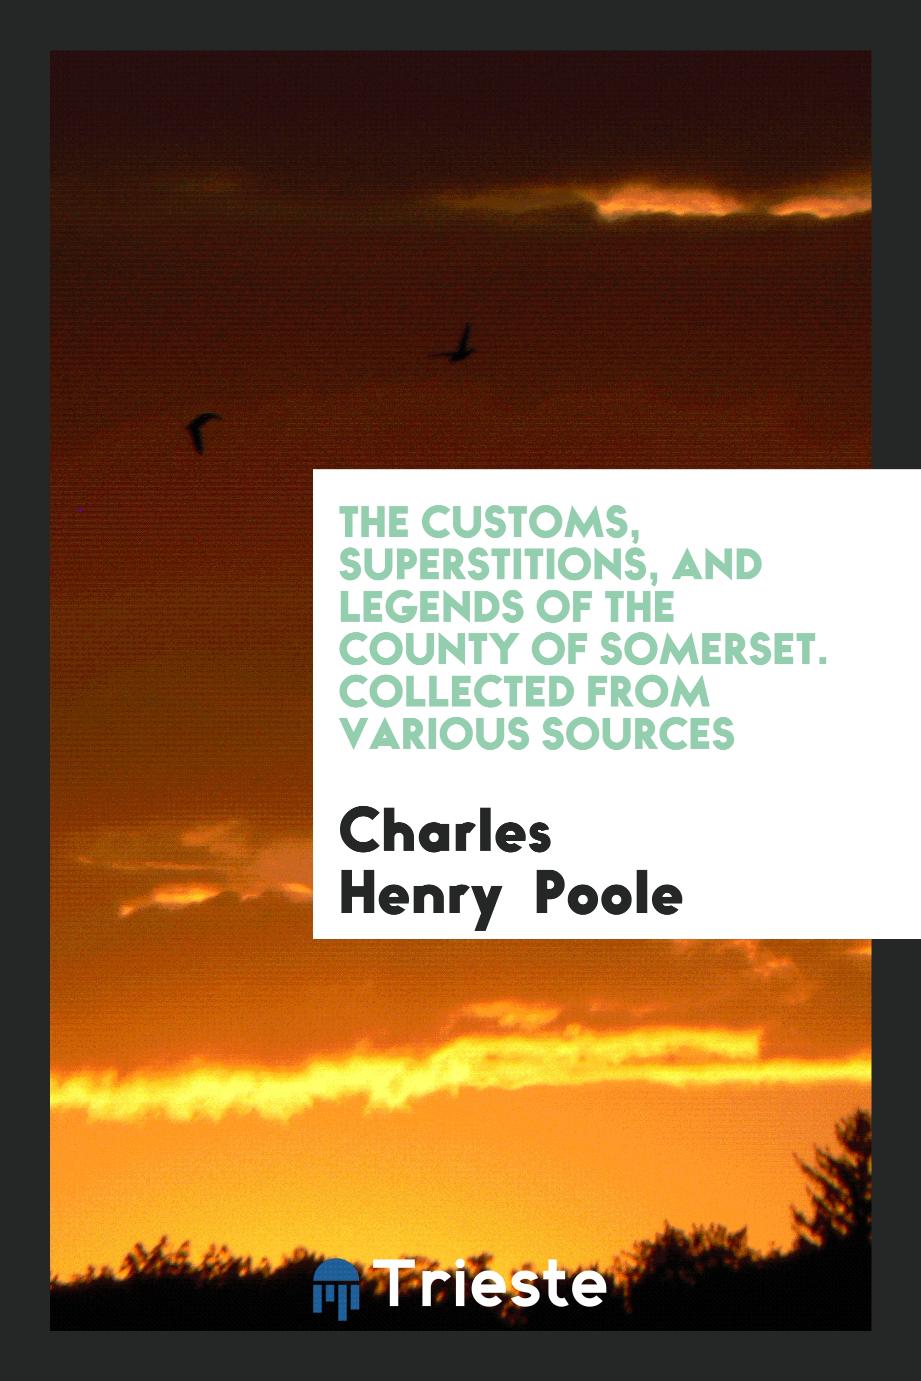 The Customs, Superstitions, and Legends of the County of Somerset. Collected from Various Sources